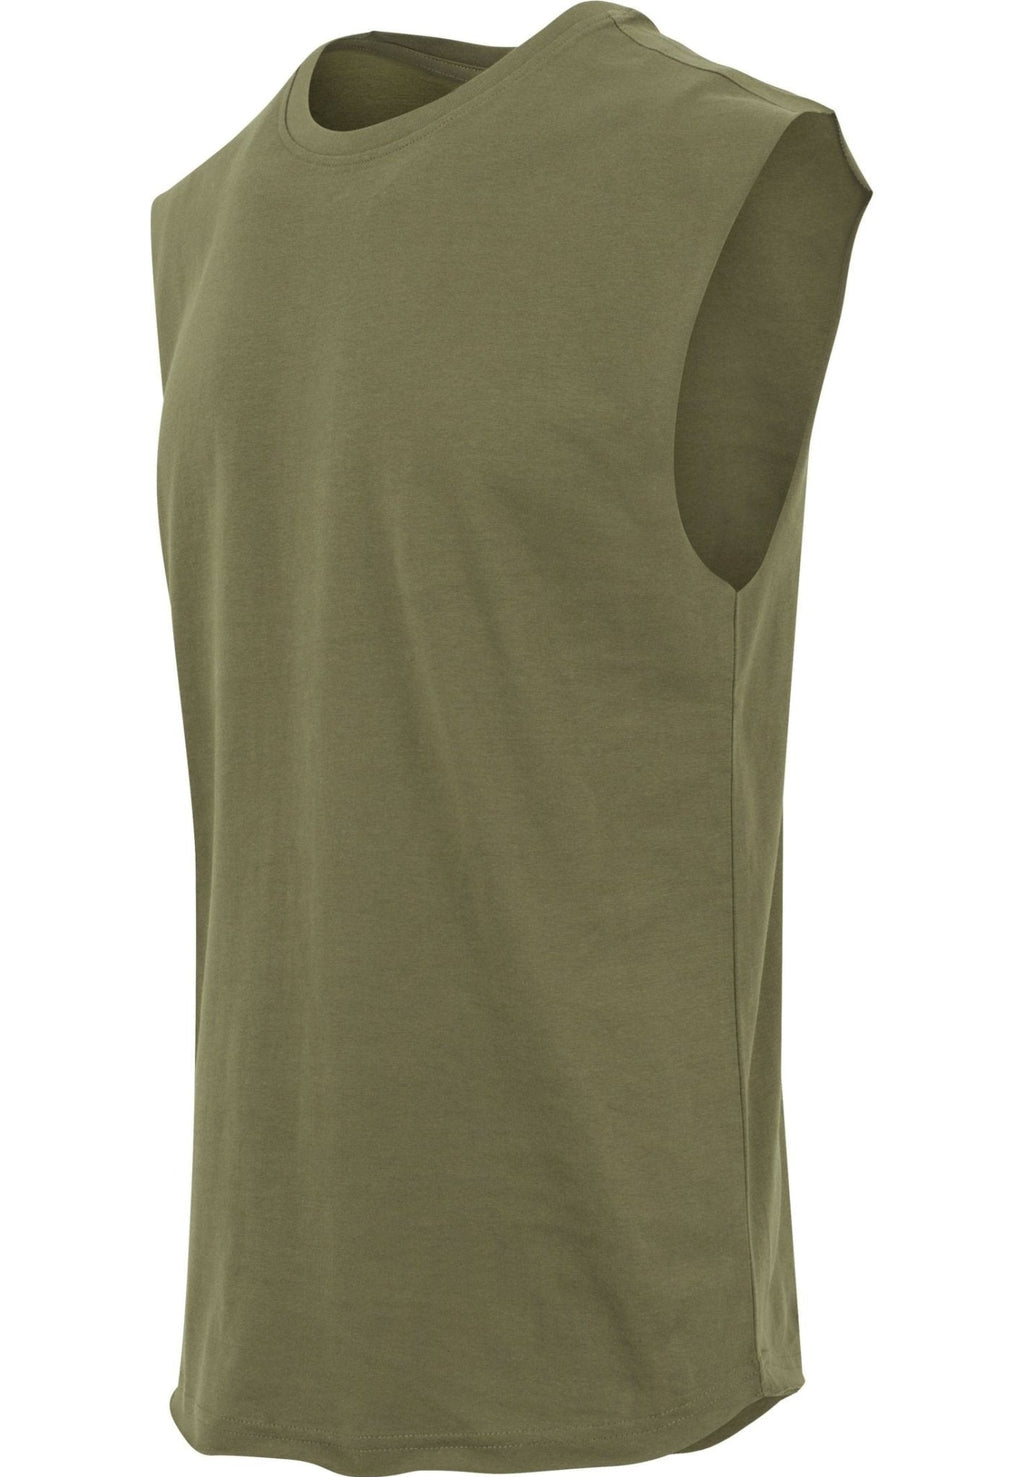 Tee sans manches - Olive